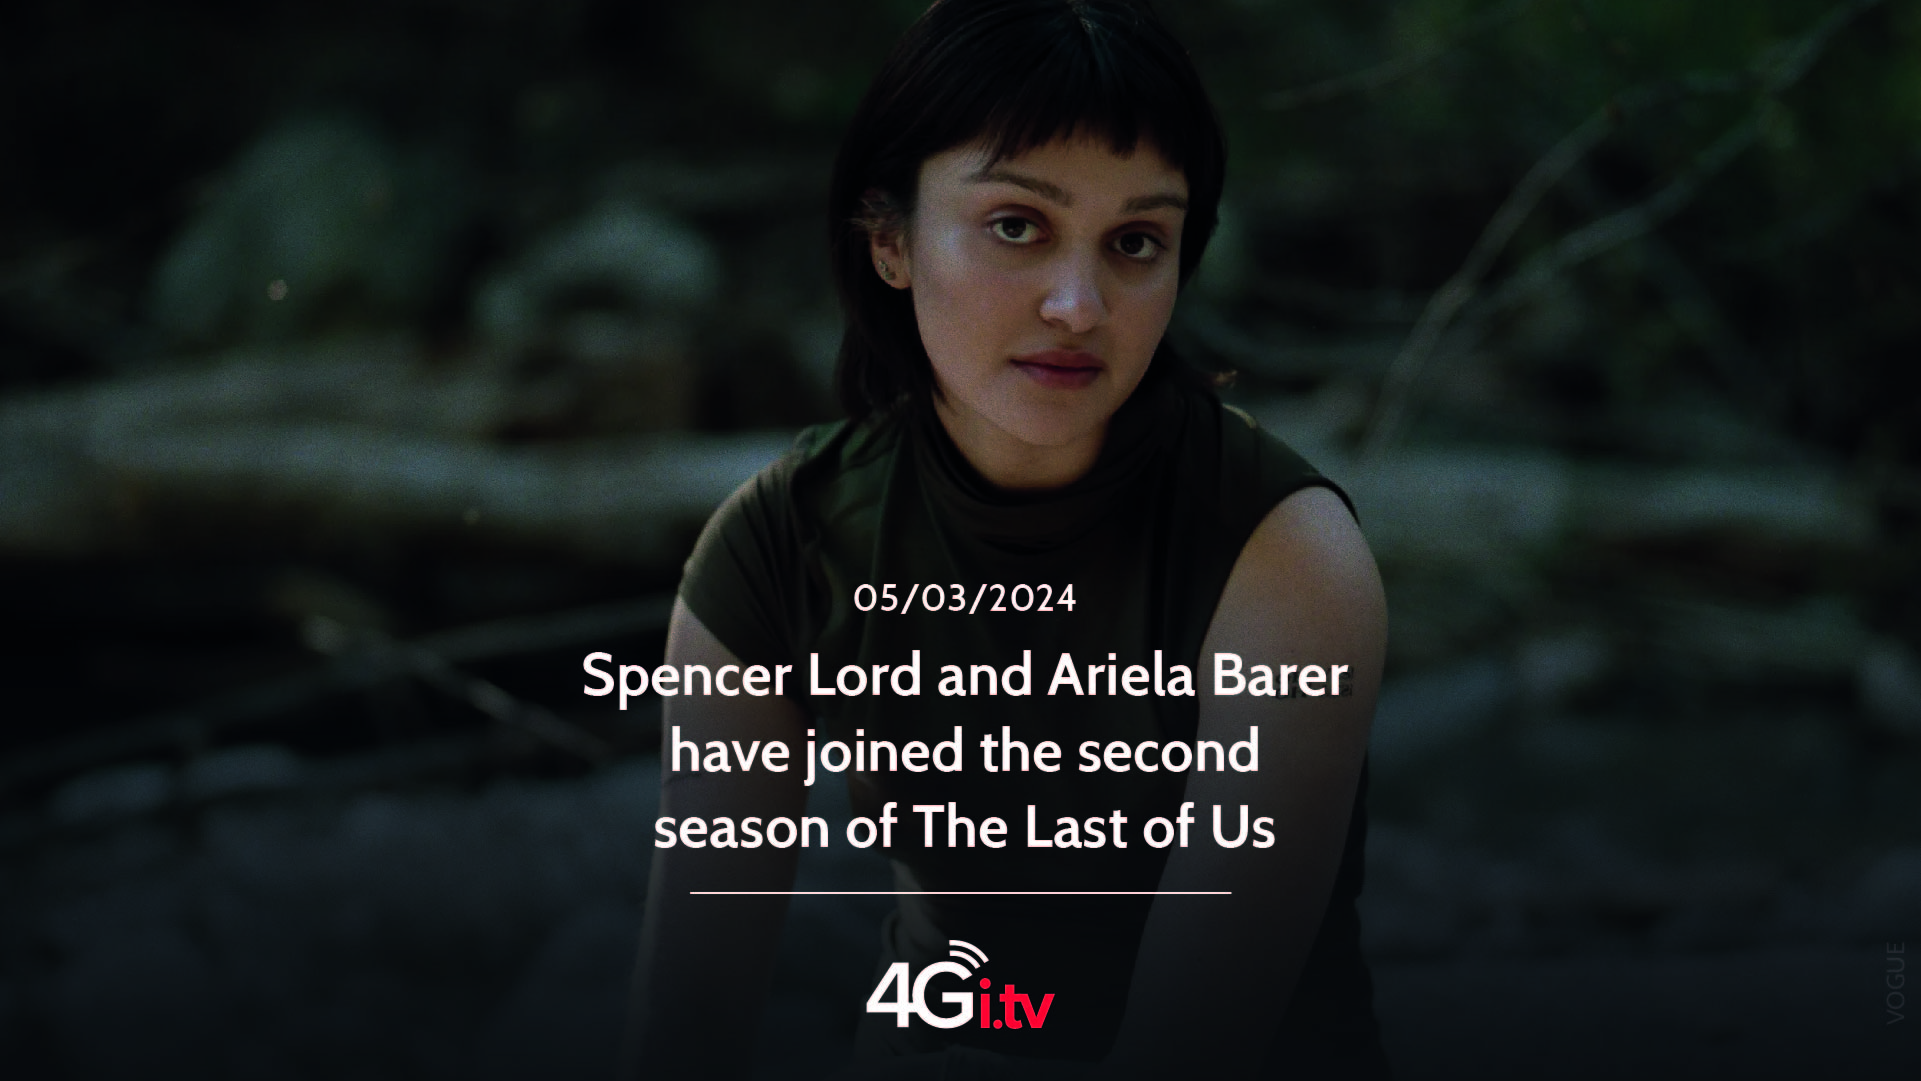 Lesen Sie mehr über den Artikel Spencer Lord and Ariela Barer have joined the second season of The Last of Us